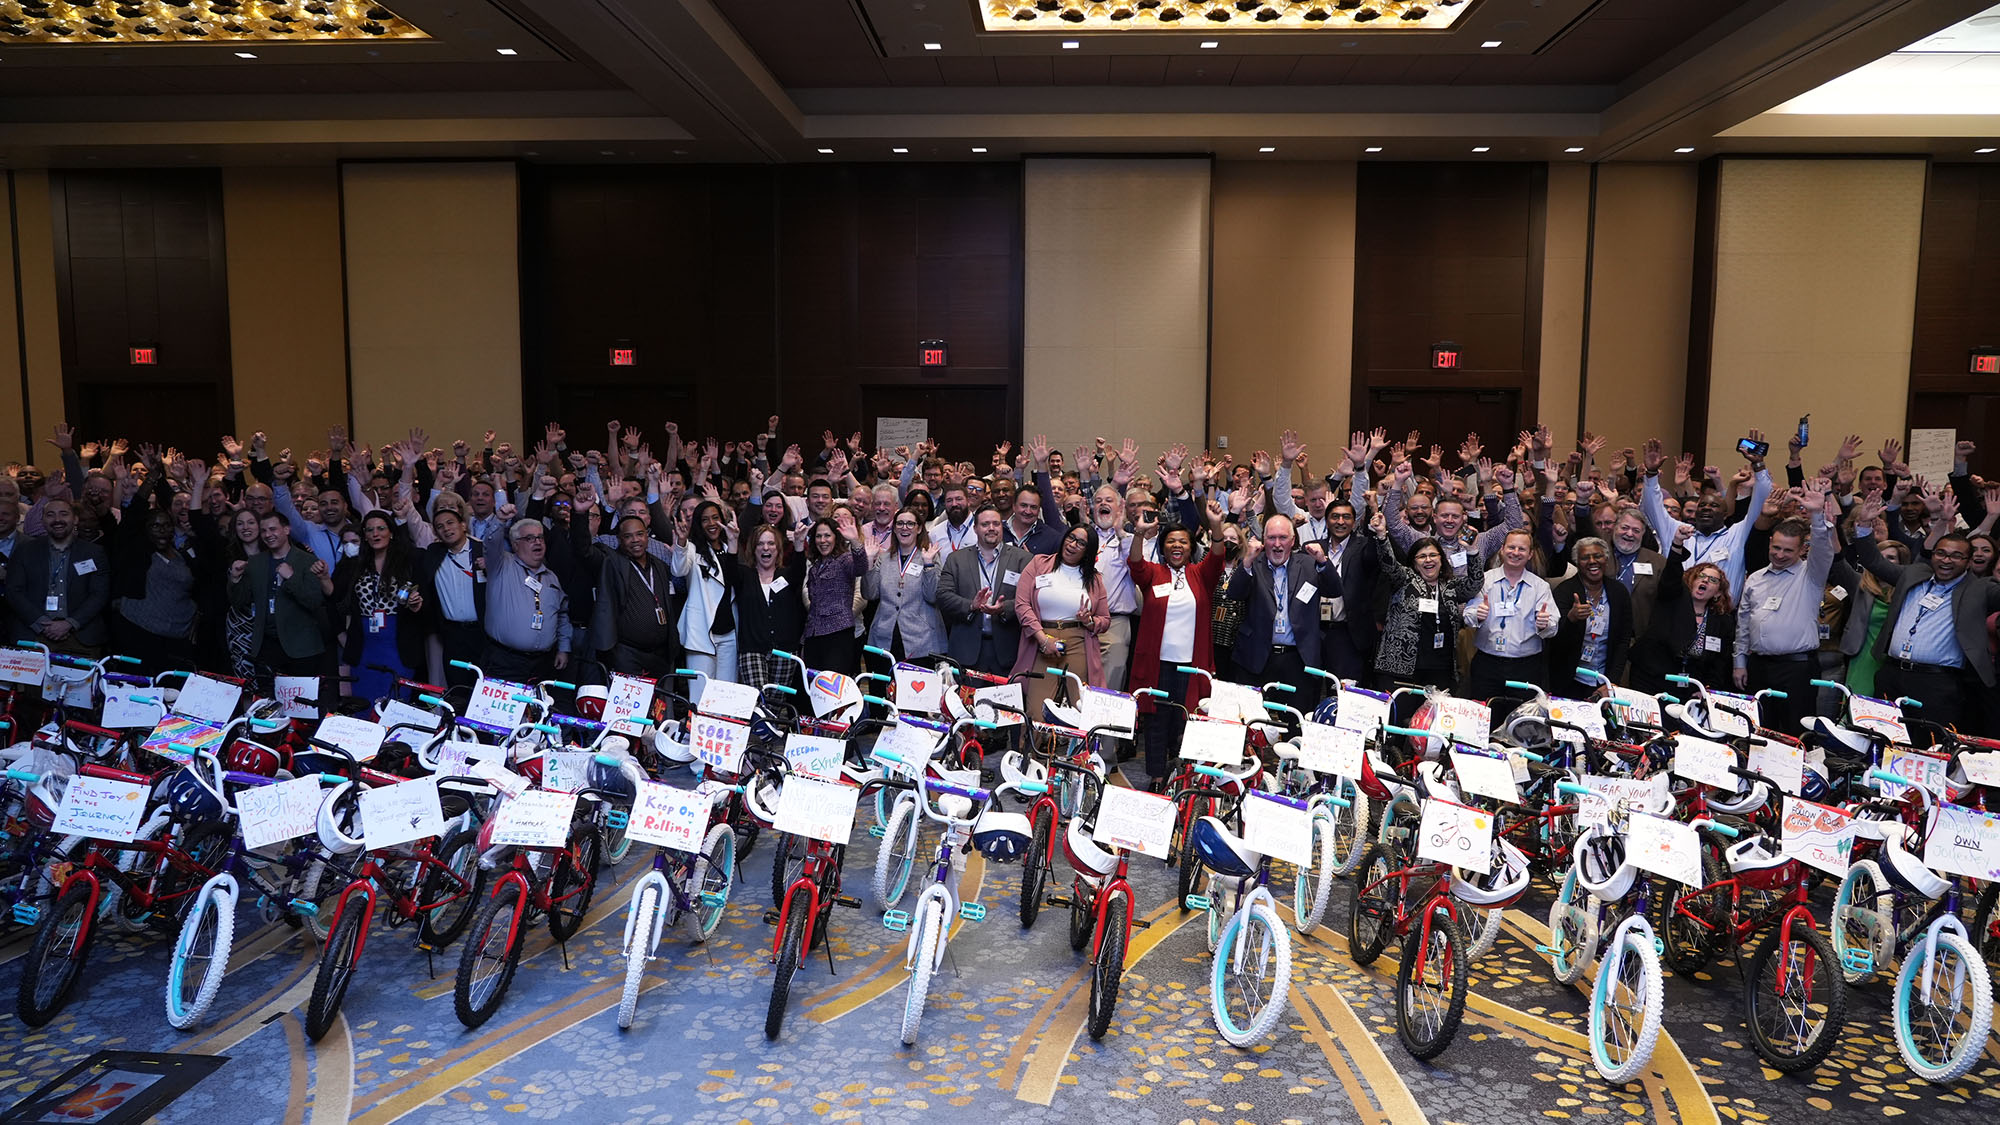 Amtrak employees stand behind newly assembled bikes for a community program. 